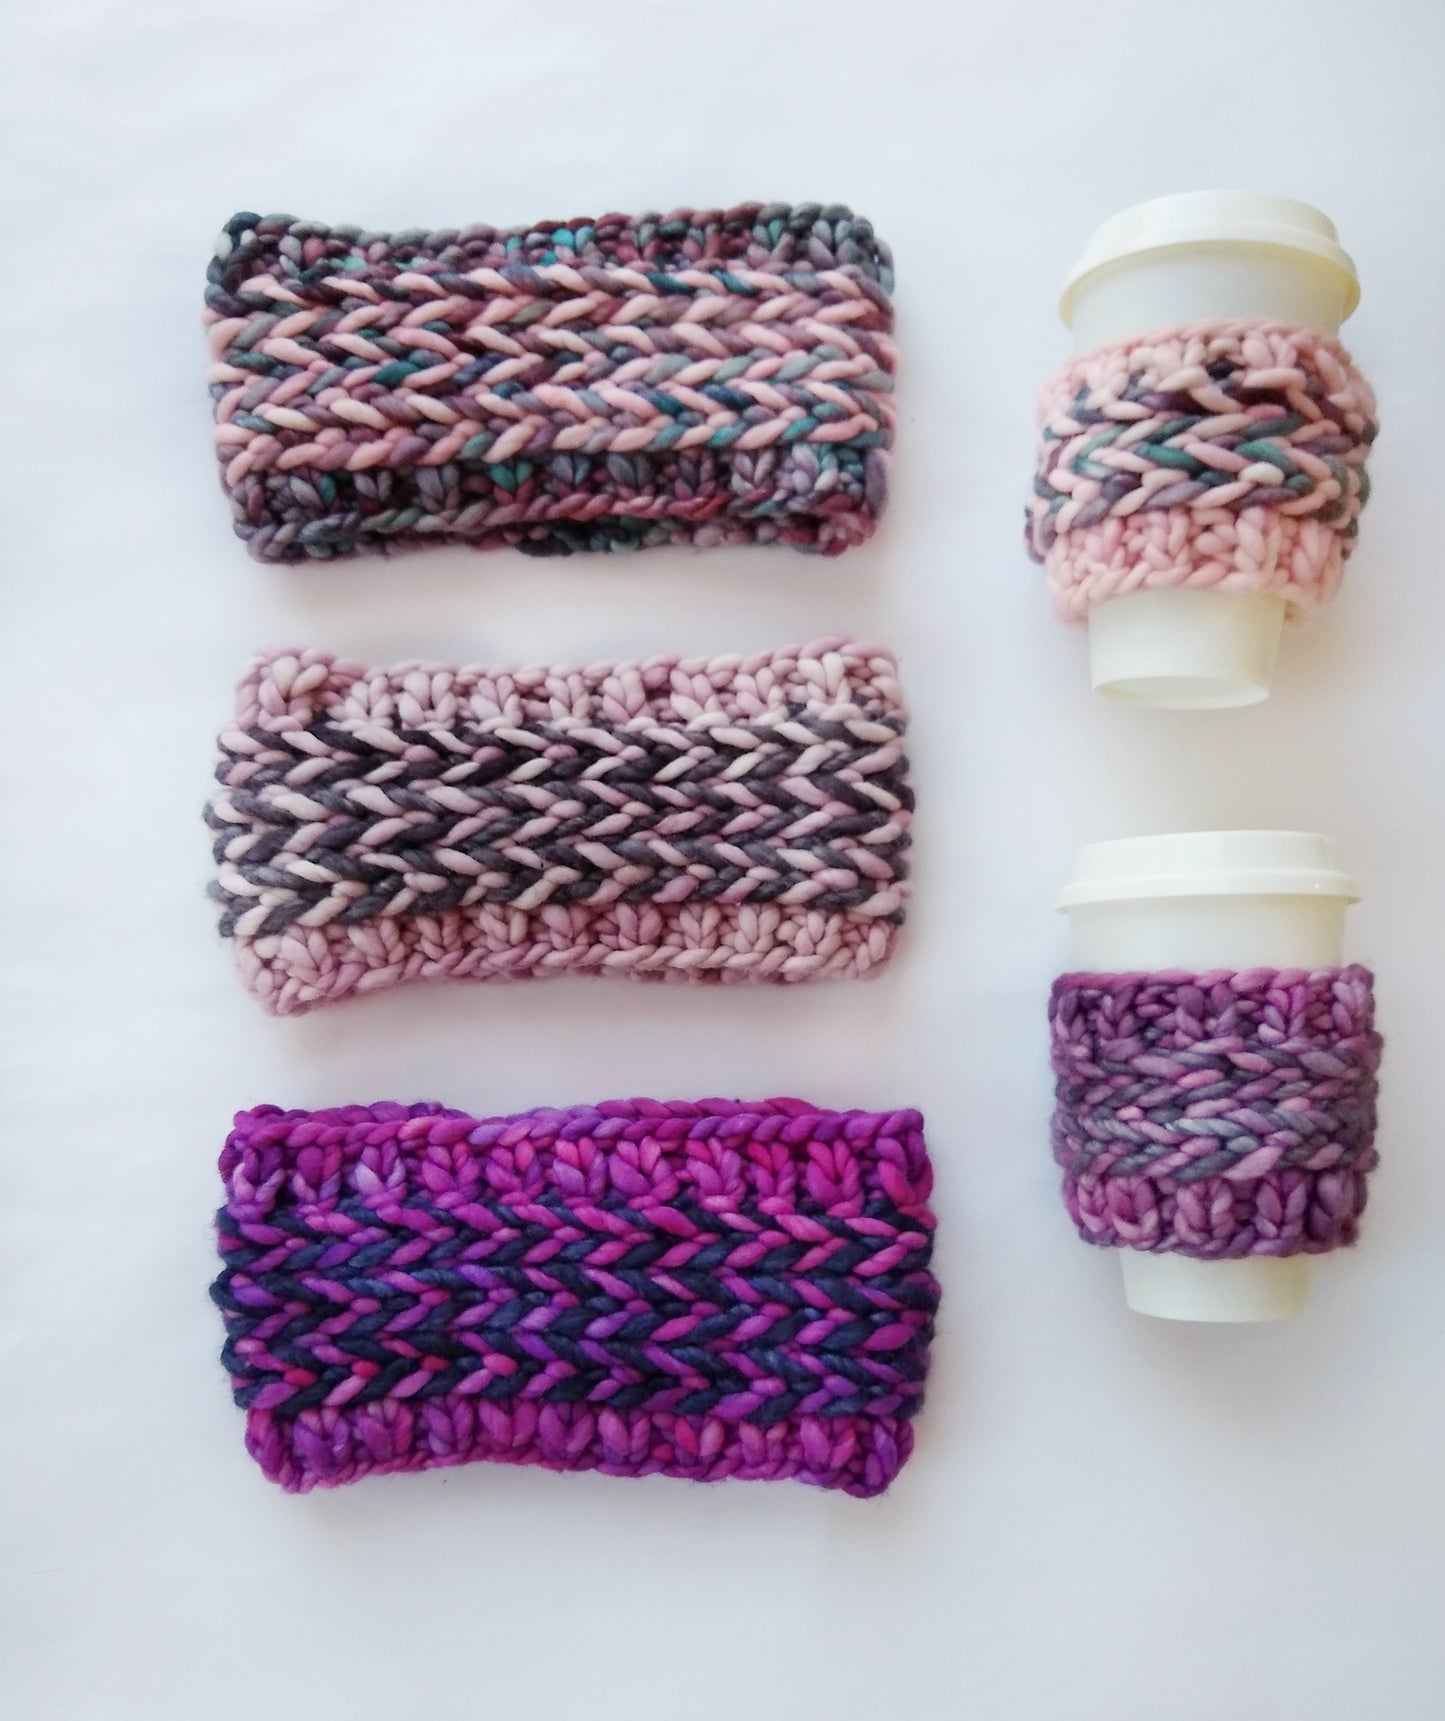 Banded Braids Headband and Cup Cozy Pattern